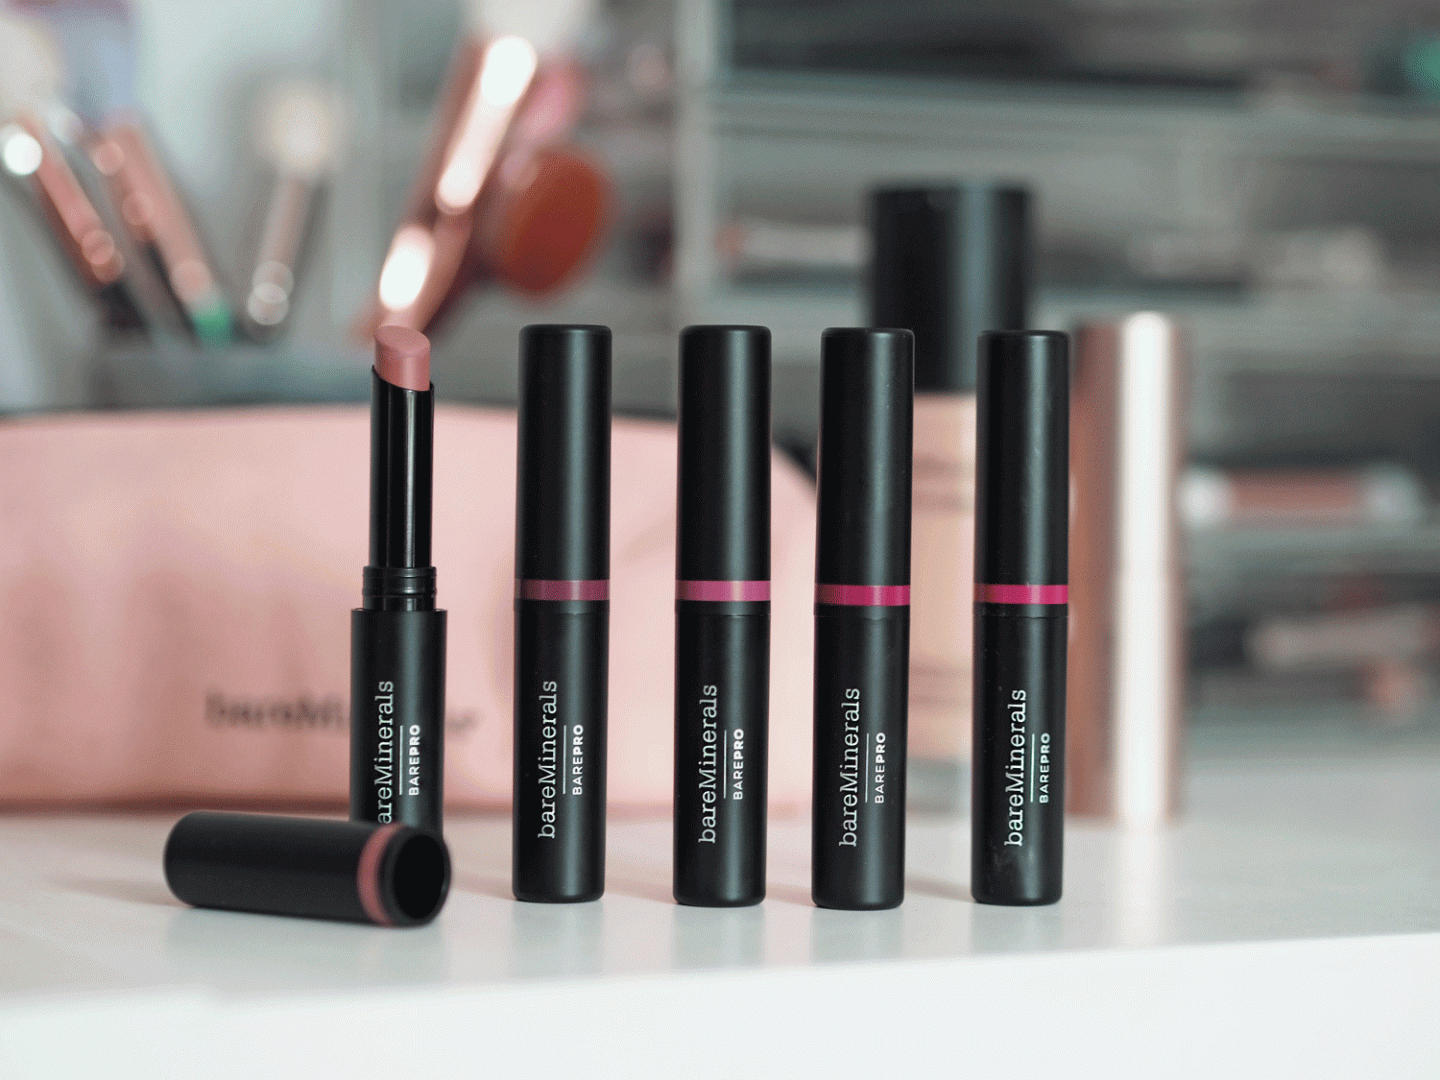 Bareminerals Barepro lipstick swatches and review